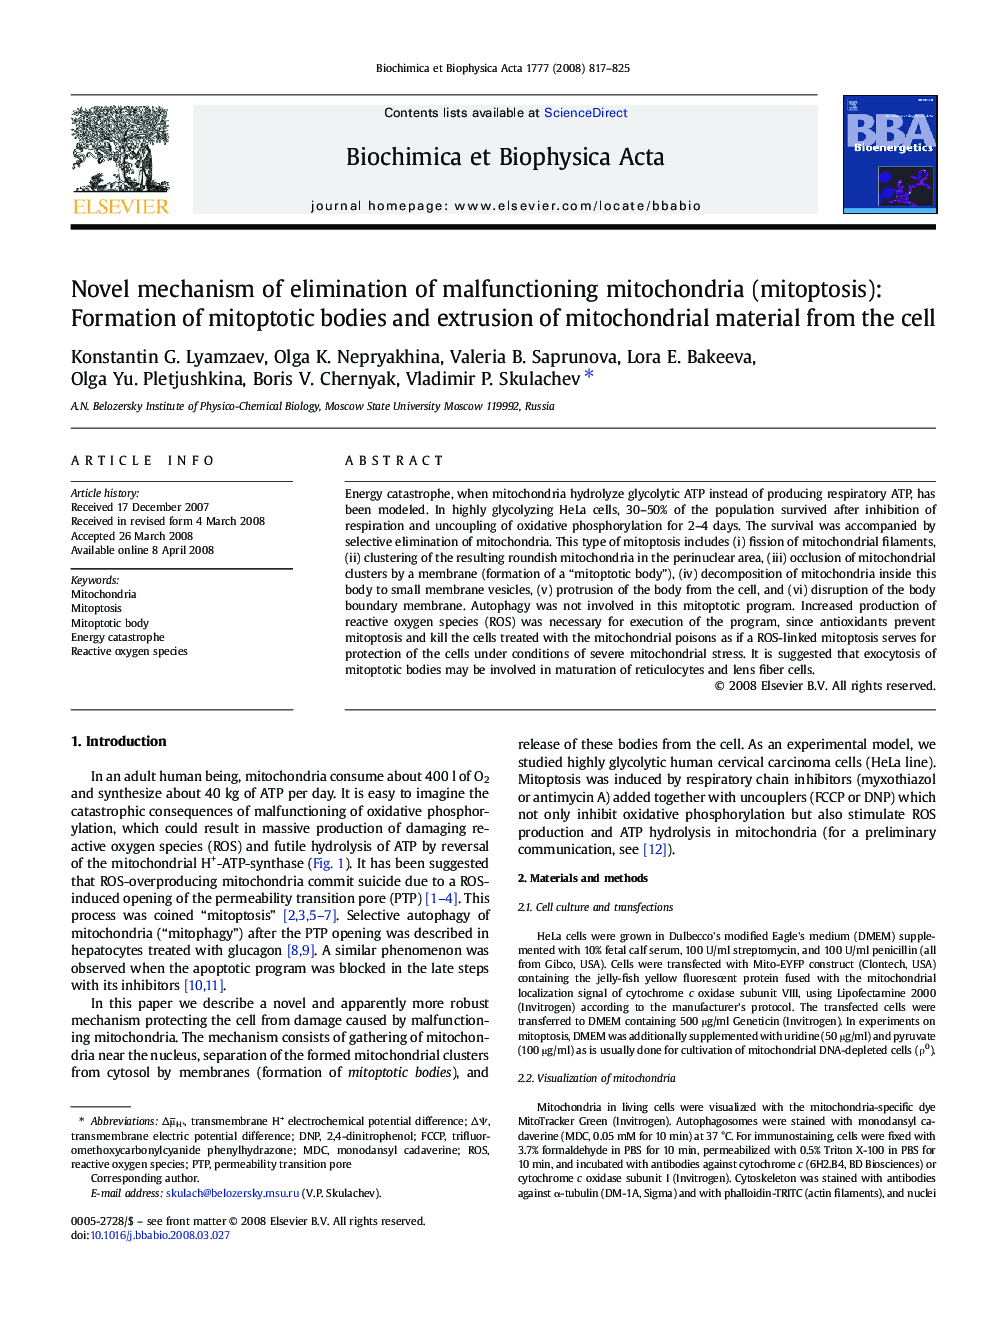 Novel mechanism of elimination of malfunctioning mitochondria (mitoptosis): Formation of mitoptotic bodies and extrusion of mitochondrial material from the cell